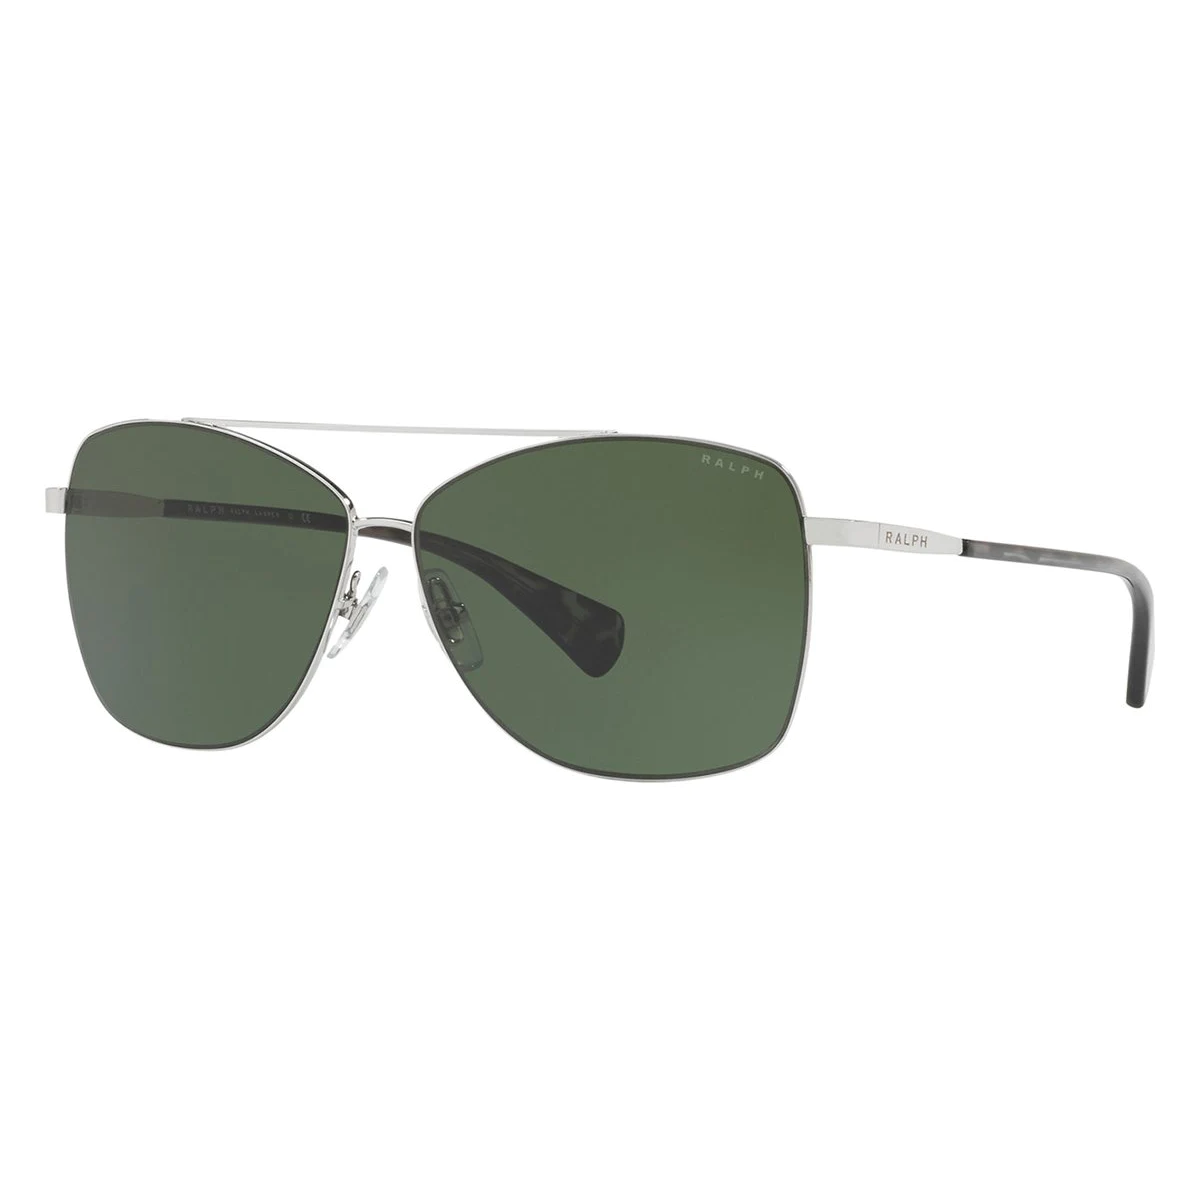 "Shop the Latest Ralph Lauren 4121 Aviator Sunglasses for Women at Optorium. Metal frames, green lenses. Fashionable and functional. Silver & black color combo. Upgrade your eyewear collection with Ralph Lauren 4121 sunglasses for women at Optorium."